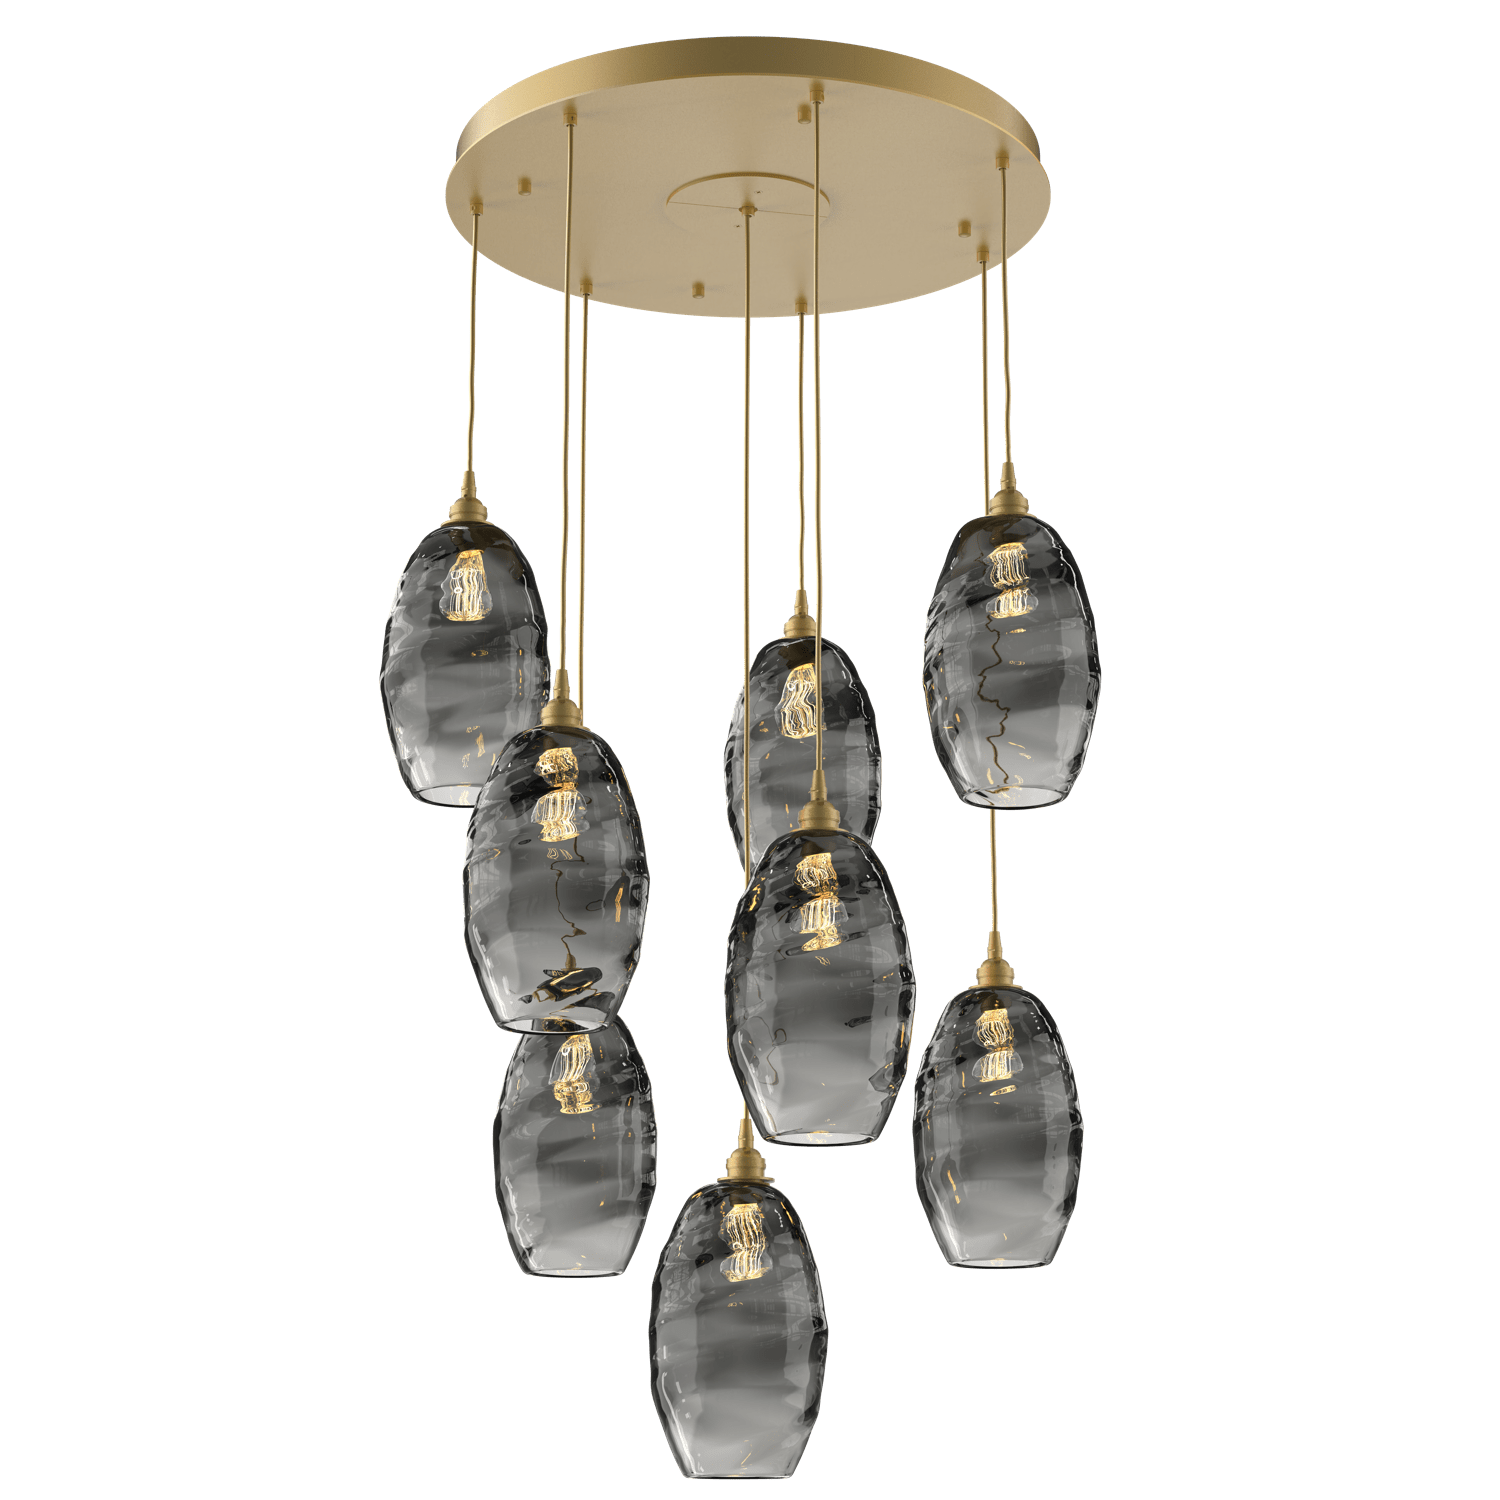 CHB0035-08-GB-OS-Hammerton-Studio-Optic-Blown-Glass-Elisse-8-light-round-pendant-chandelier-with-gilded-brass-finish-and-optic-smoke-blown-glass-shades-and-incandescent-lamping